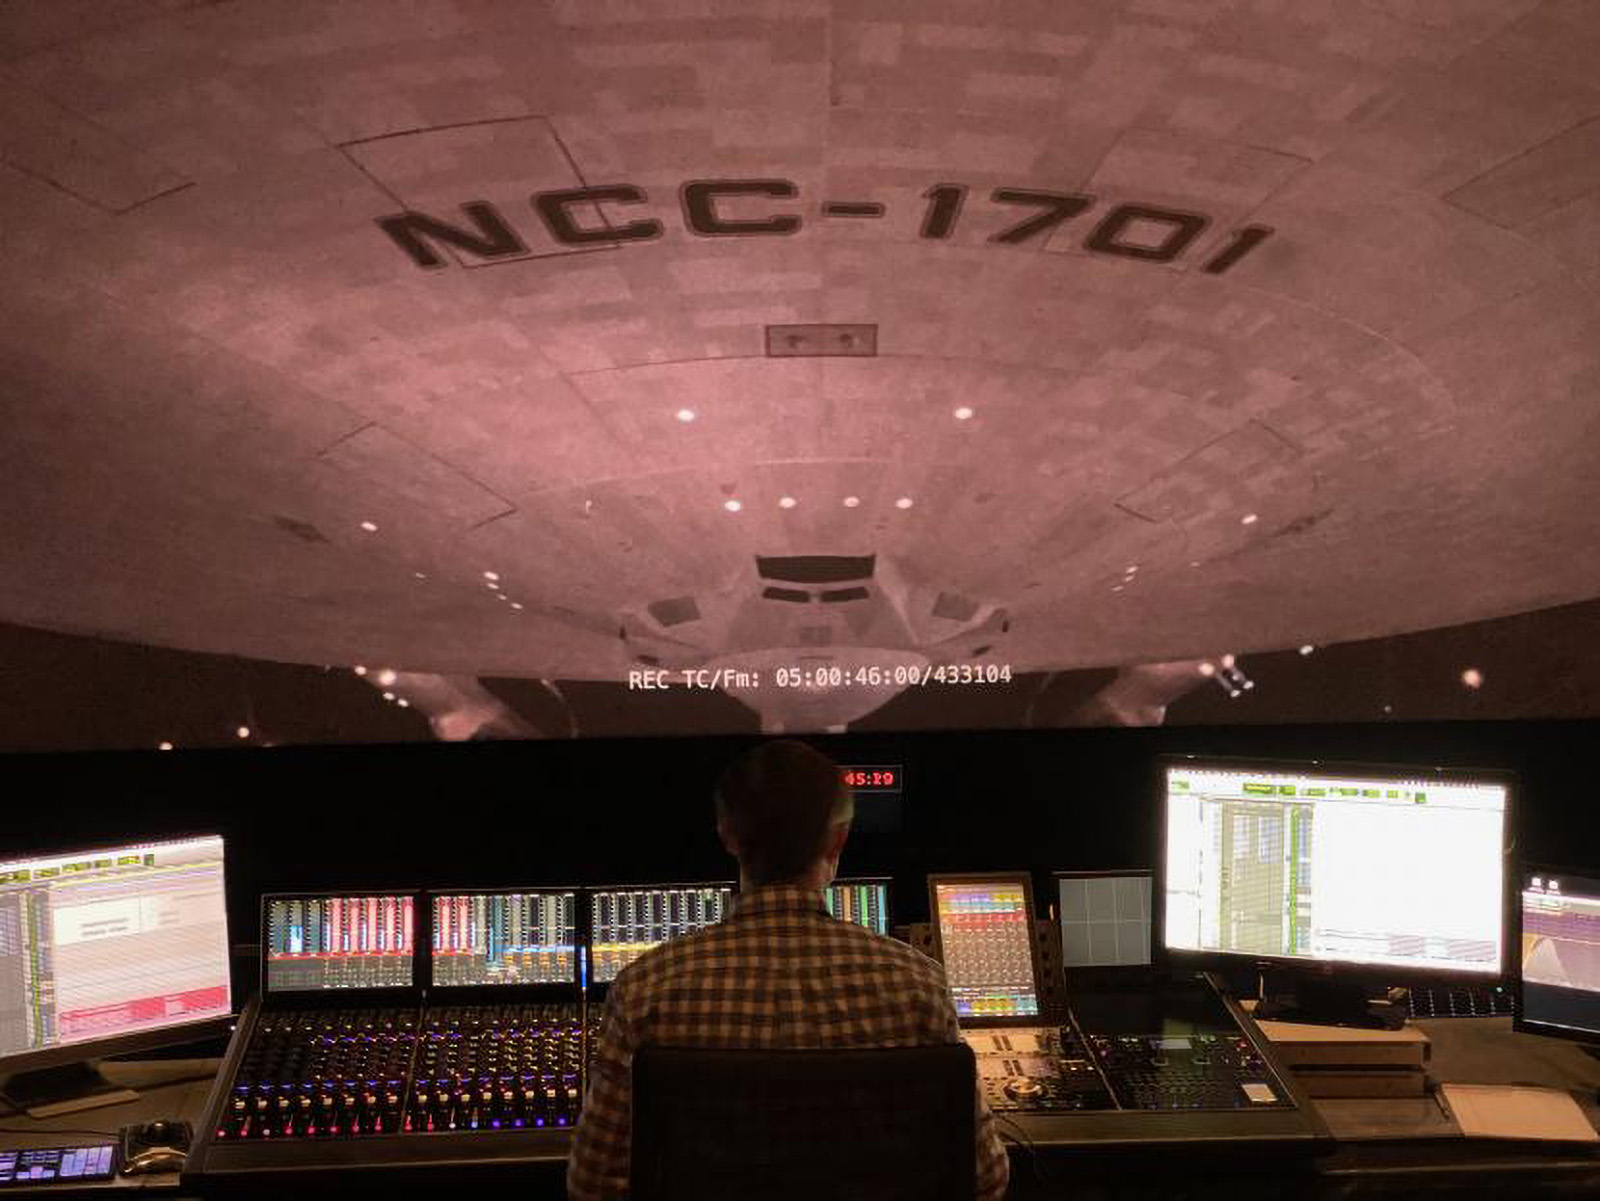 Mike Matessino at work on the Dolby Atmos audio remaster for Star Trek: TMP.